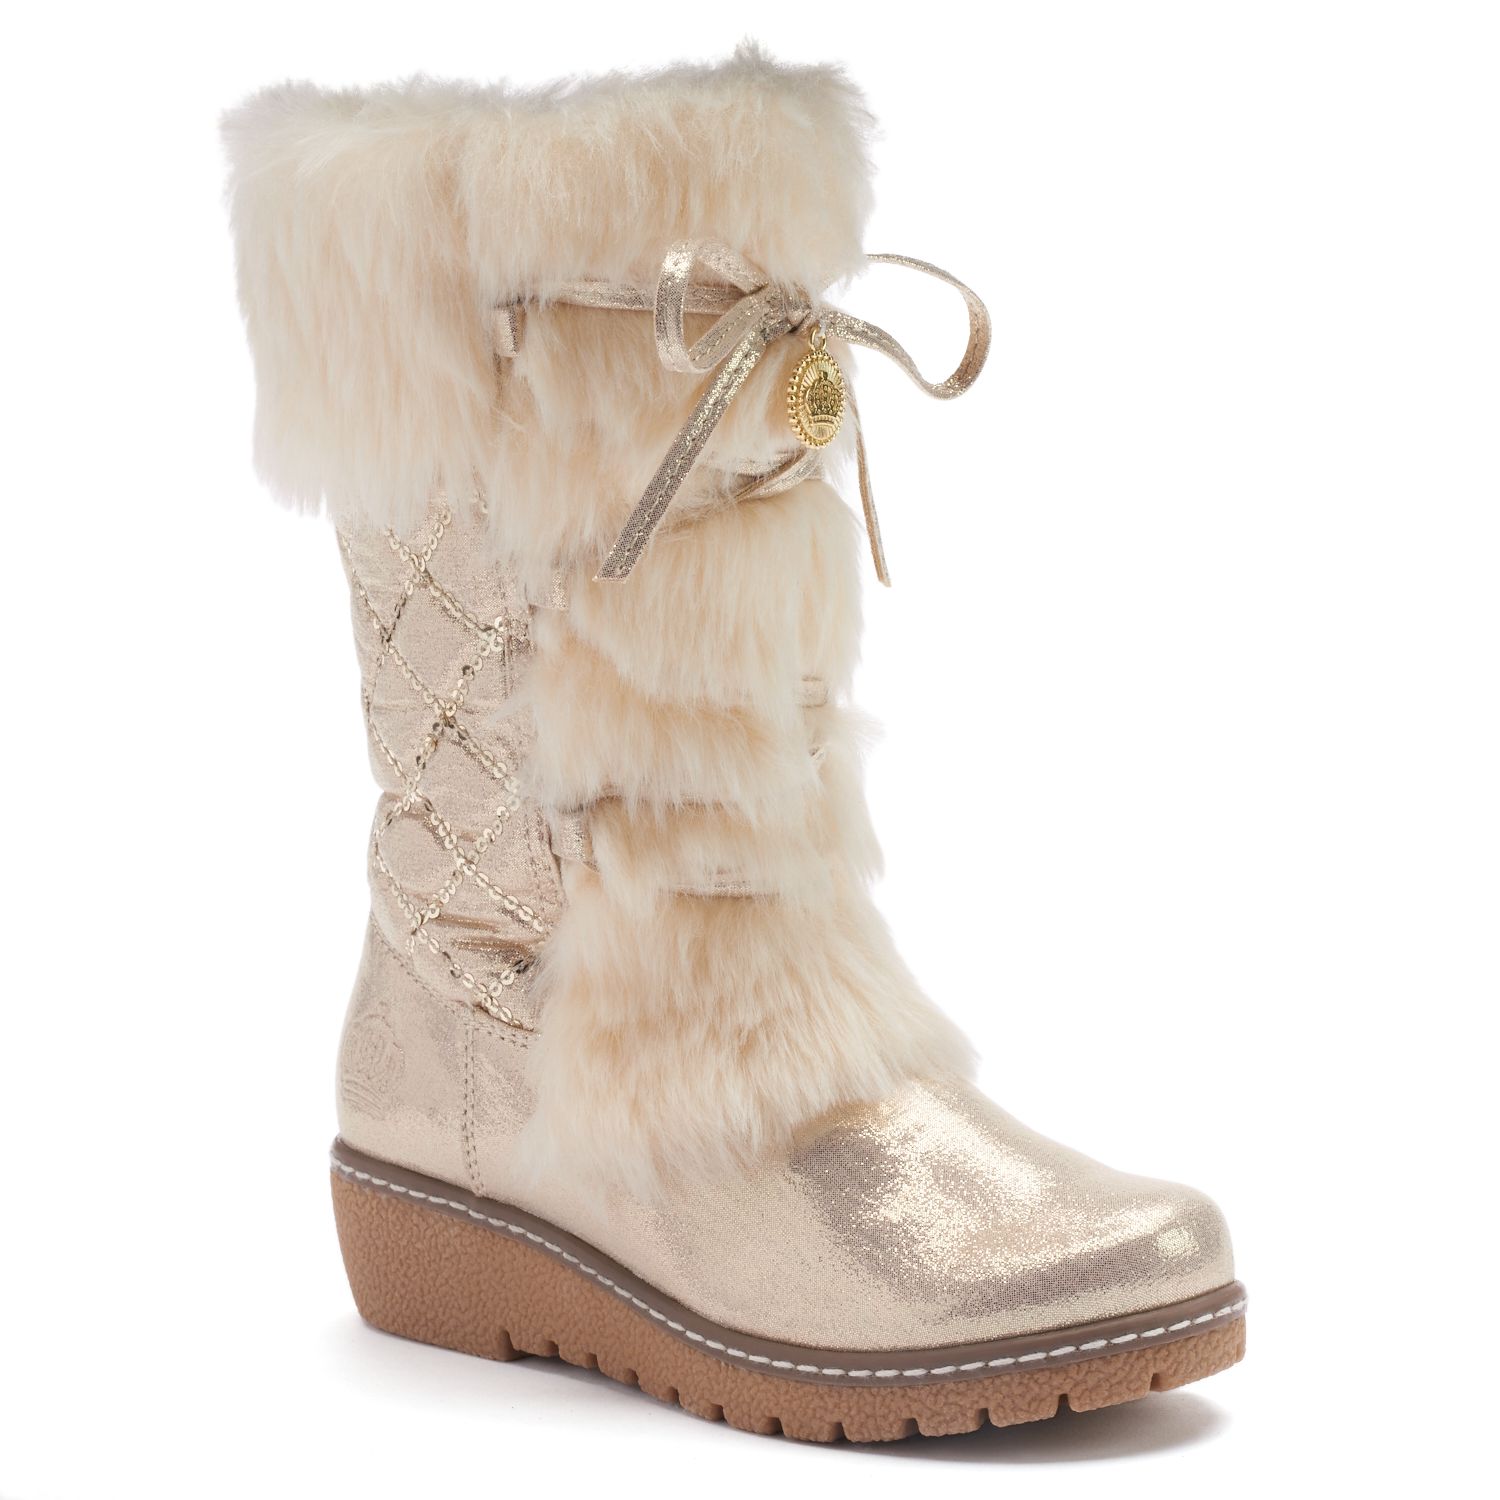 Juicy Couture Girls' Faux-Fur Boots